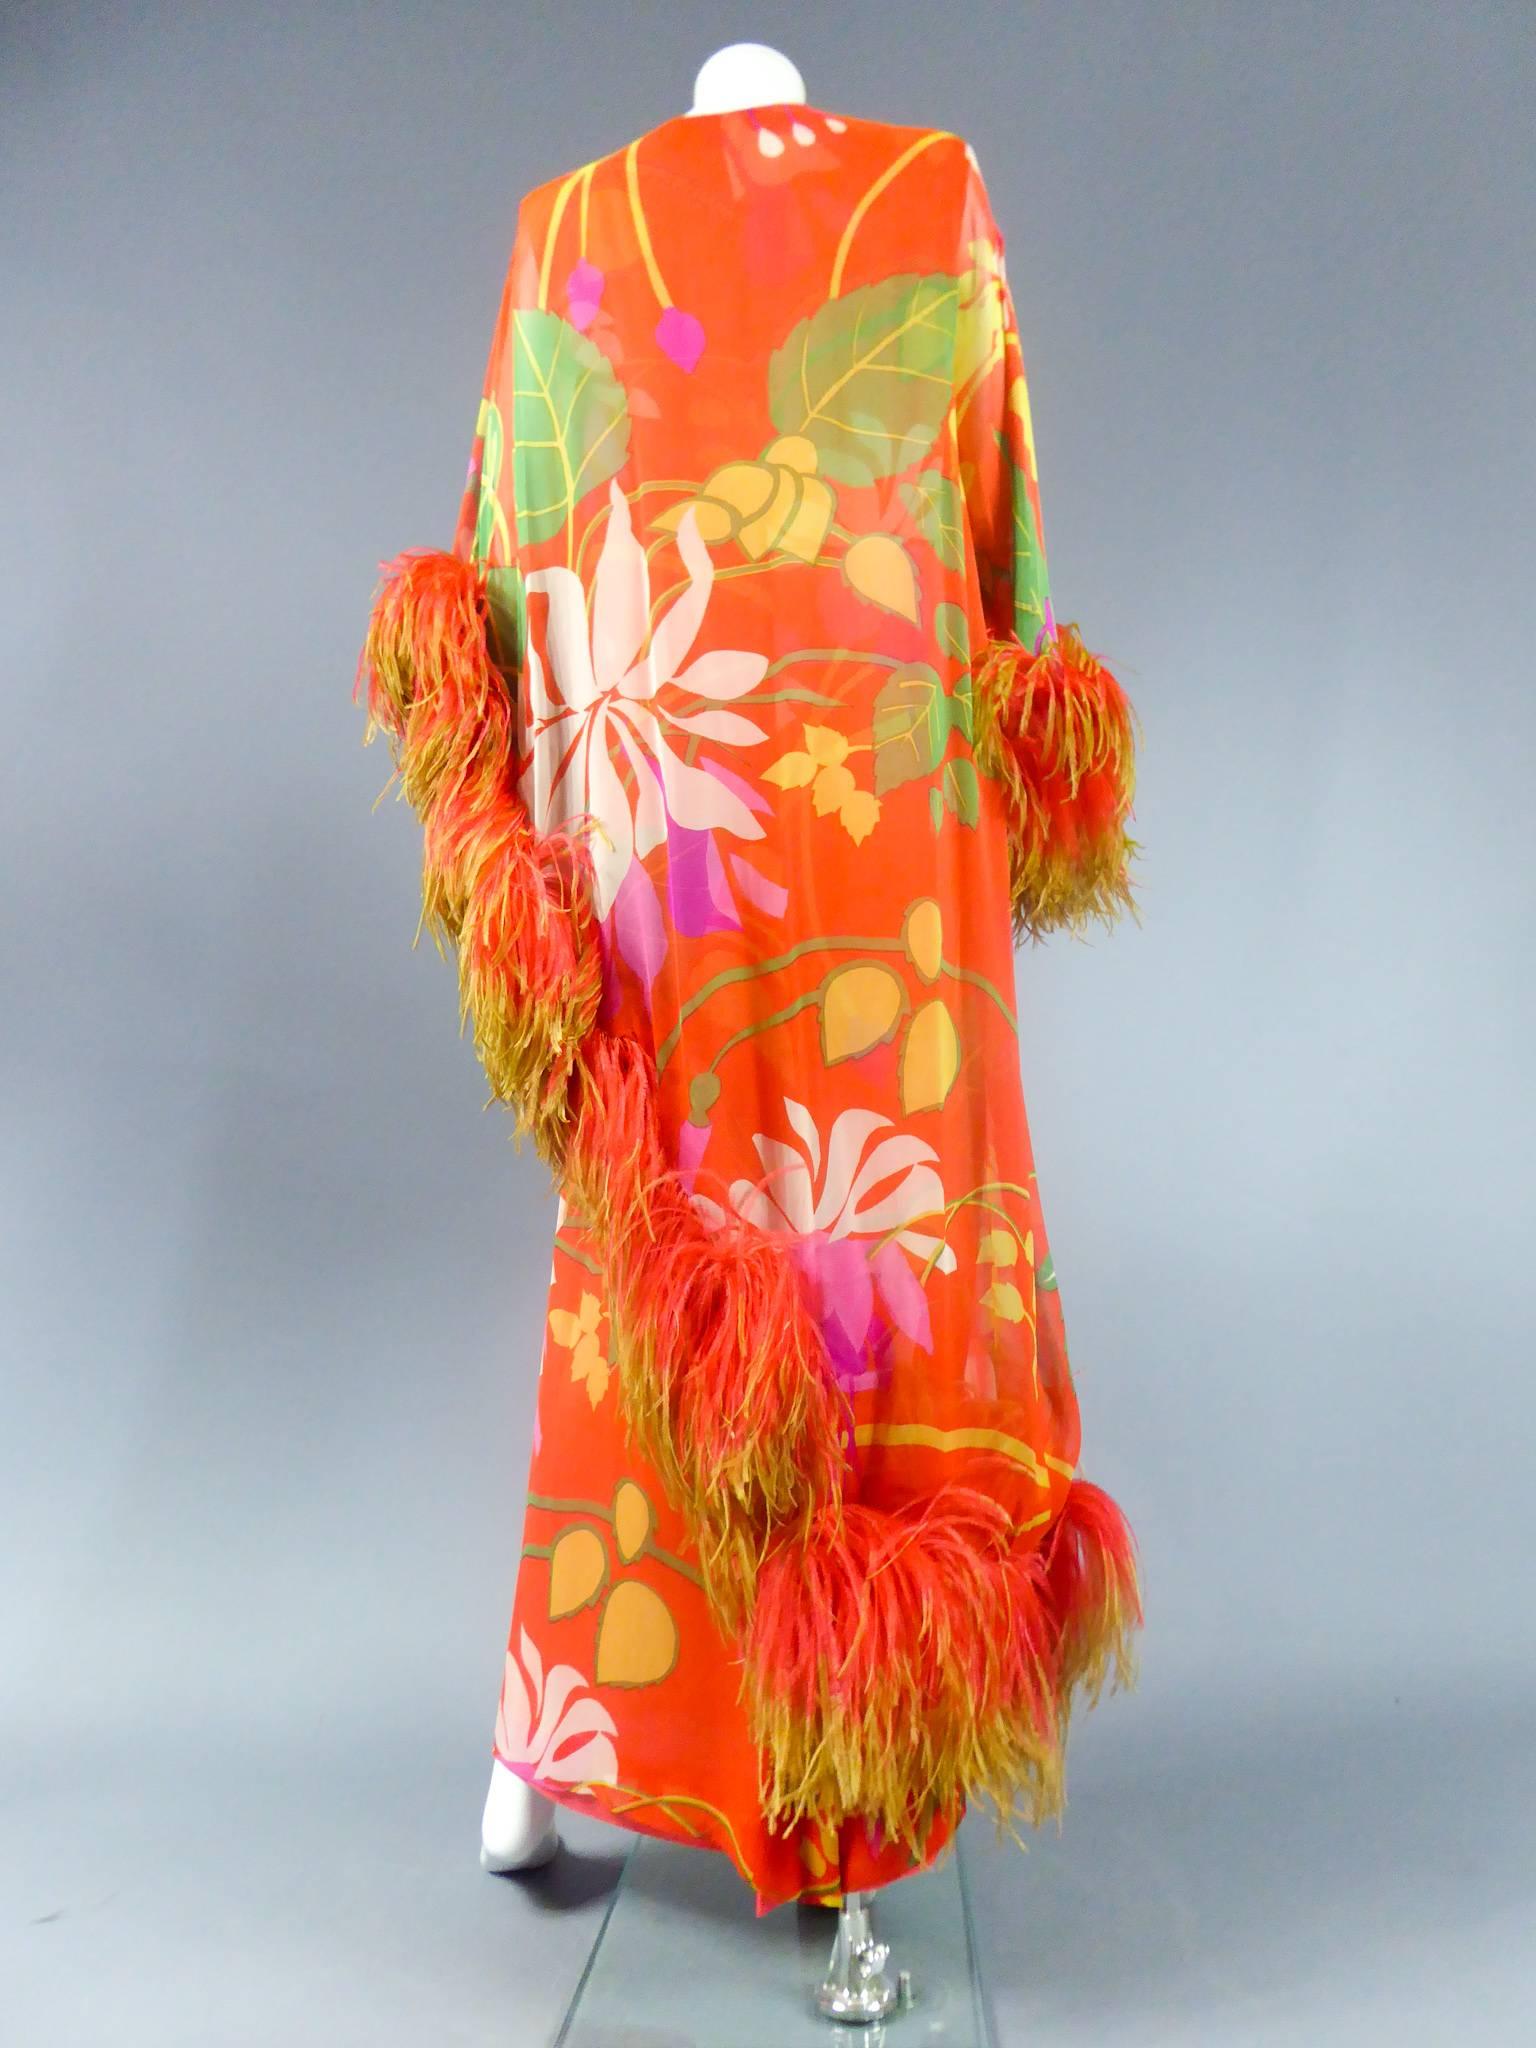 Circa 1975

France

Long tube and cape dress by Pierre Balmain Haute Couture in printed orange chiffon and tropical floral patterns. Sleeve and asymmetric cape similar underlined coral ostrich feathers in lime-green gradient. A nod to the colors and